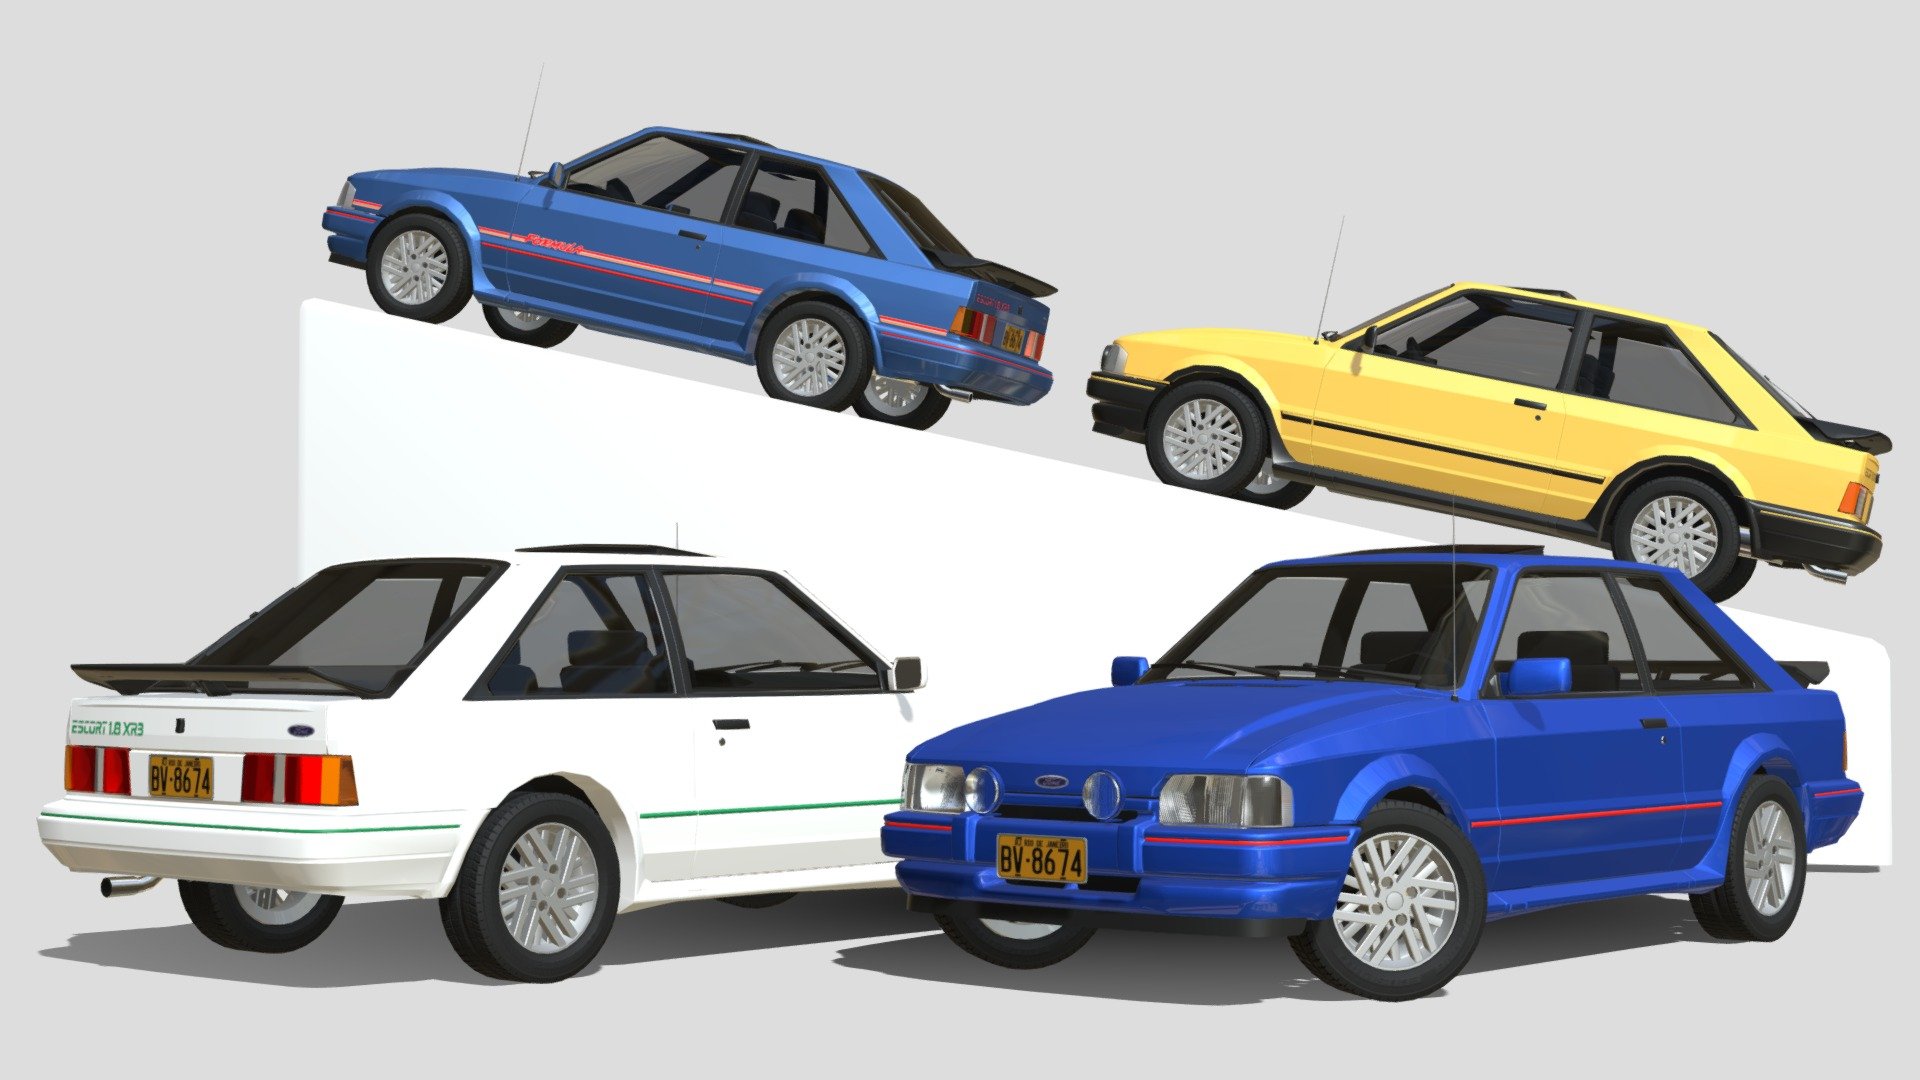 May I present part 2 of the escorb model adhd saga!
First based off my dream spec, the Caribe Blue XR3 (so beautiful like dayum), I then realized MK4 XR3's arent aaaaaaaall that different so I went ahead, dug up all my good ol Quatro Rodas magazines from back in the day and some prior knowledge and modelled all the remaining variations of the hatchback 89+ XR3. There are 4 main versions, the standard 1.8 XR3 represented by the Caribe Blue one, the Benetton special edition &lsquo;Super Sport' XR3, created in homage to the Benetton team win in F1 using Ford engines, The &lsquo;89 nicknamed Escortwagen because of the partnership between VW and Ford, first year of the fancy cool bodykit, unpainted, and lastly the Fórmula XR3, which was a special limited edition featuring active electronic shock absorbers, a first in Brazil, an attempt of Ford to counter the &lsquo;technologic' gap they had against the competition (that had MPFI and other techy stuff for a long time before). Made in limited numbers, 350 blue units and 350 white 3d model